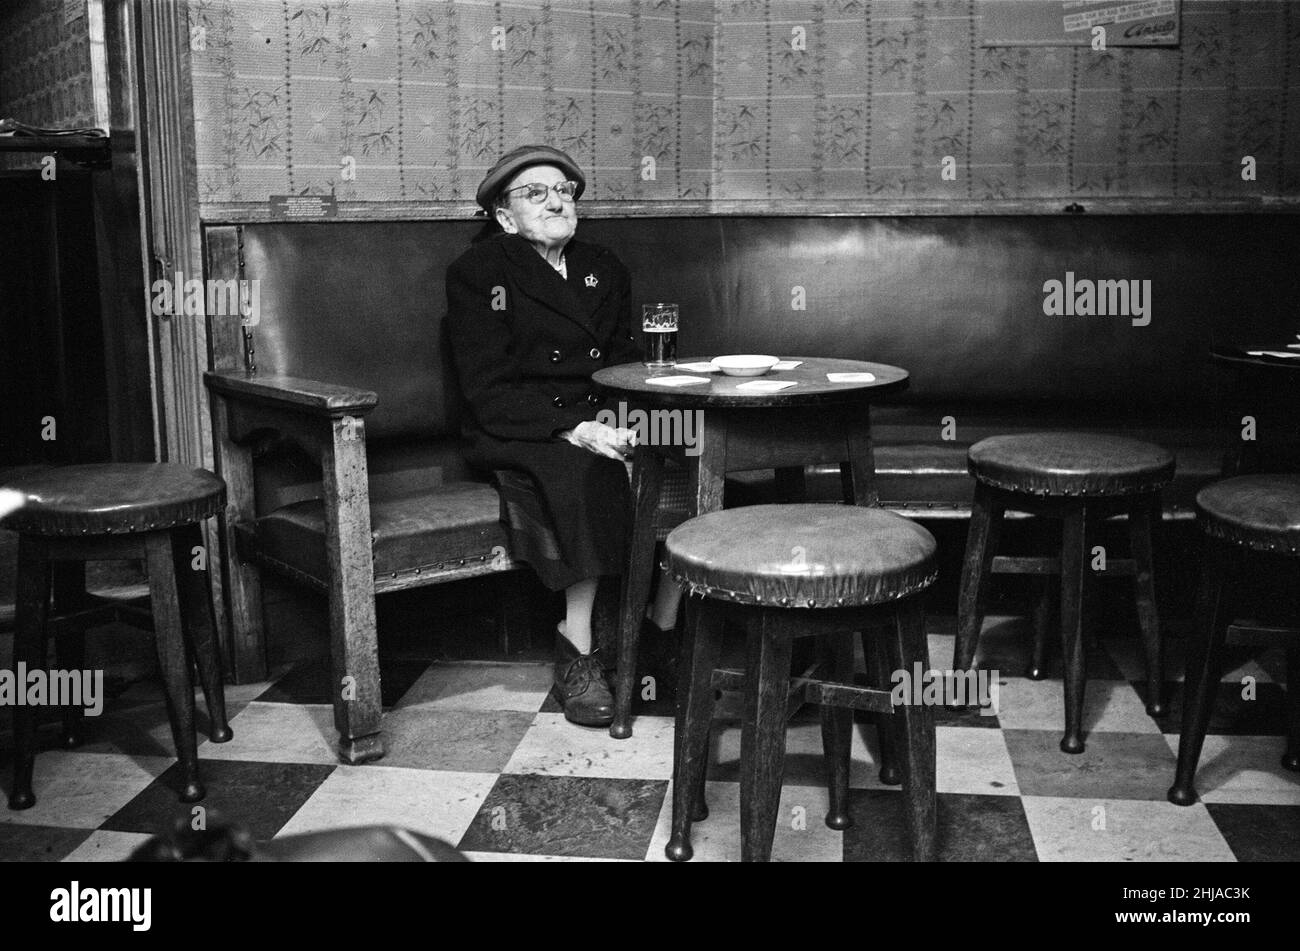 91-year-old Harriet Brookes has been elected the most loyal drinker of Ansell's Beer. As a reward she is able to receive a free pint of beer a week and has her own seat reserved in her local - The Prince George, Crabtree Road, Birmingham. 25th February 1964. Stock Photo